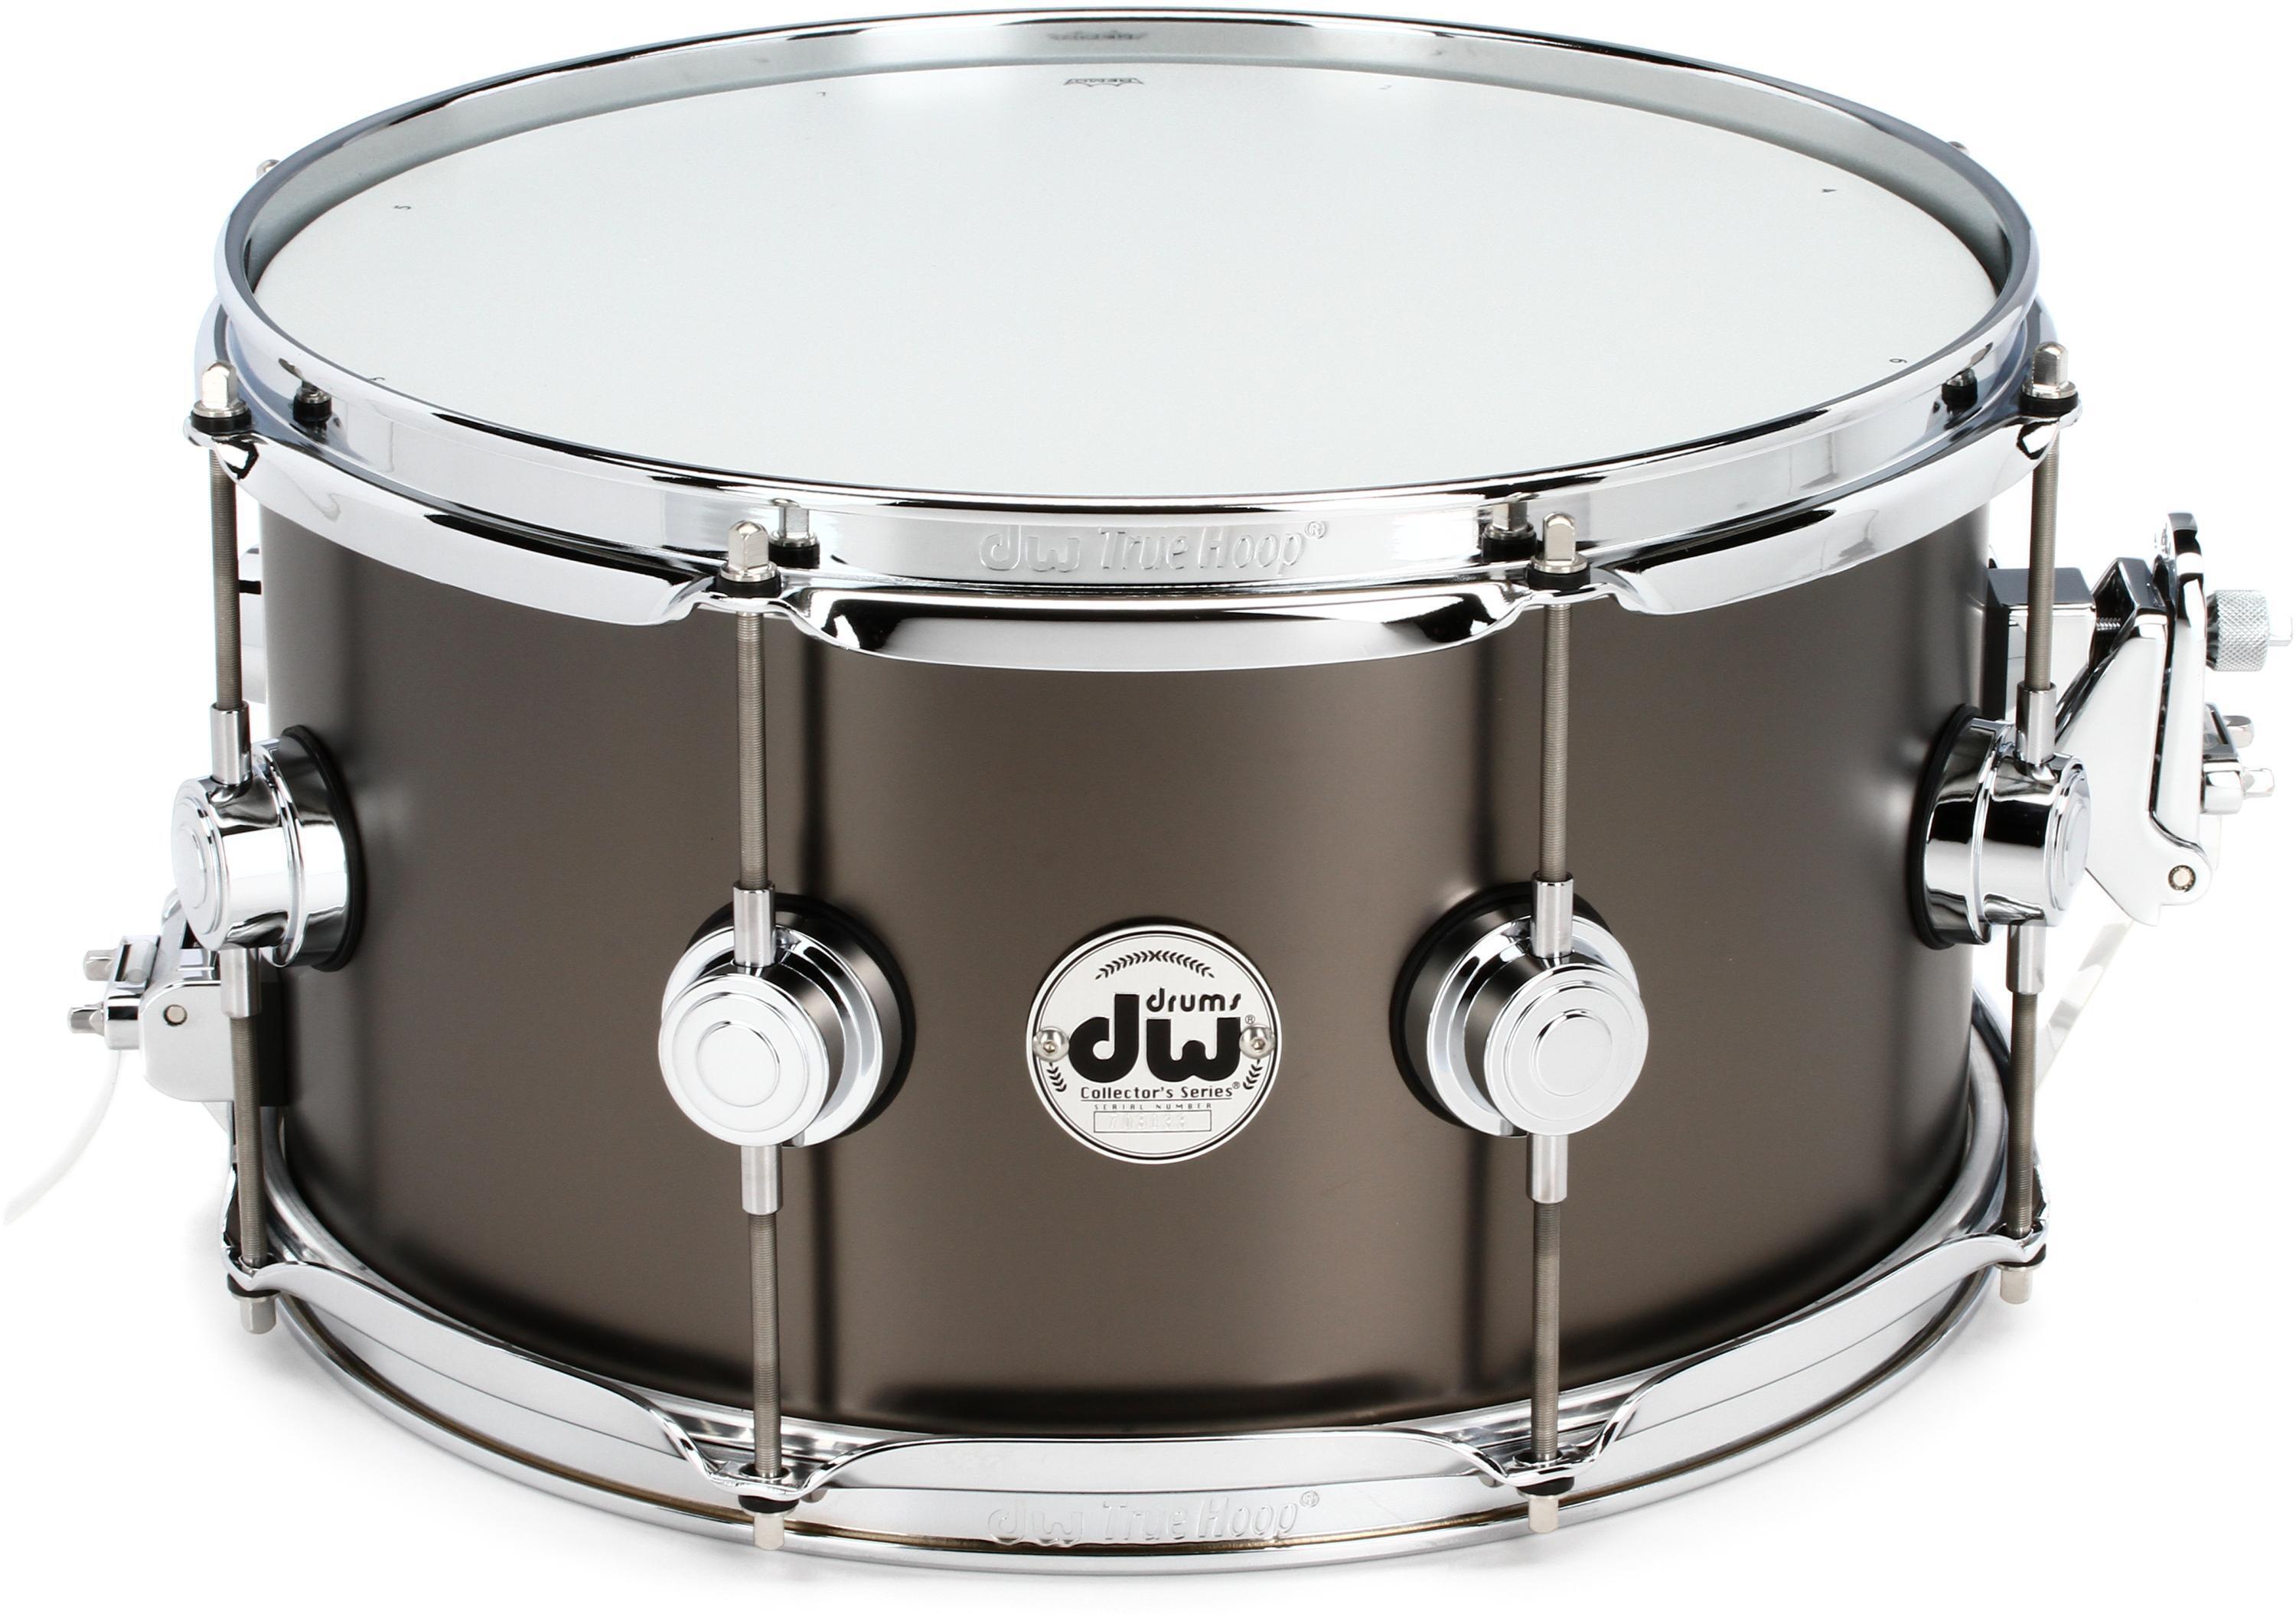 DW Collector's Series Metal Snare Drum - 7 x 13 inch - Satin Black Over  Brass